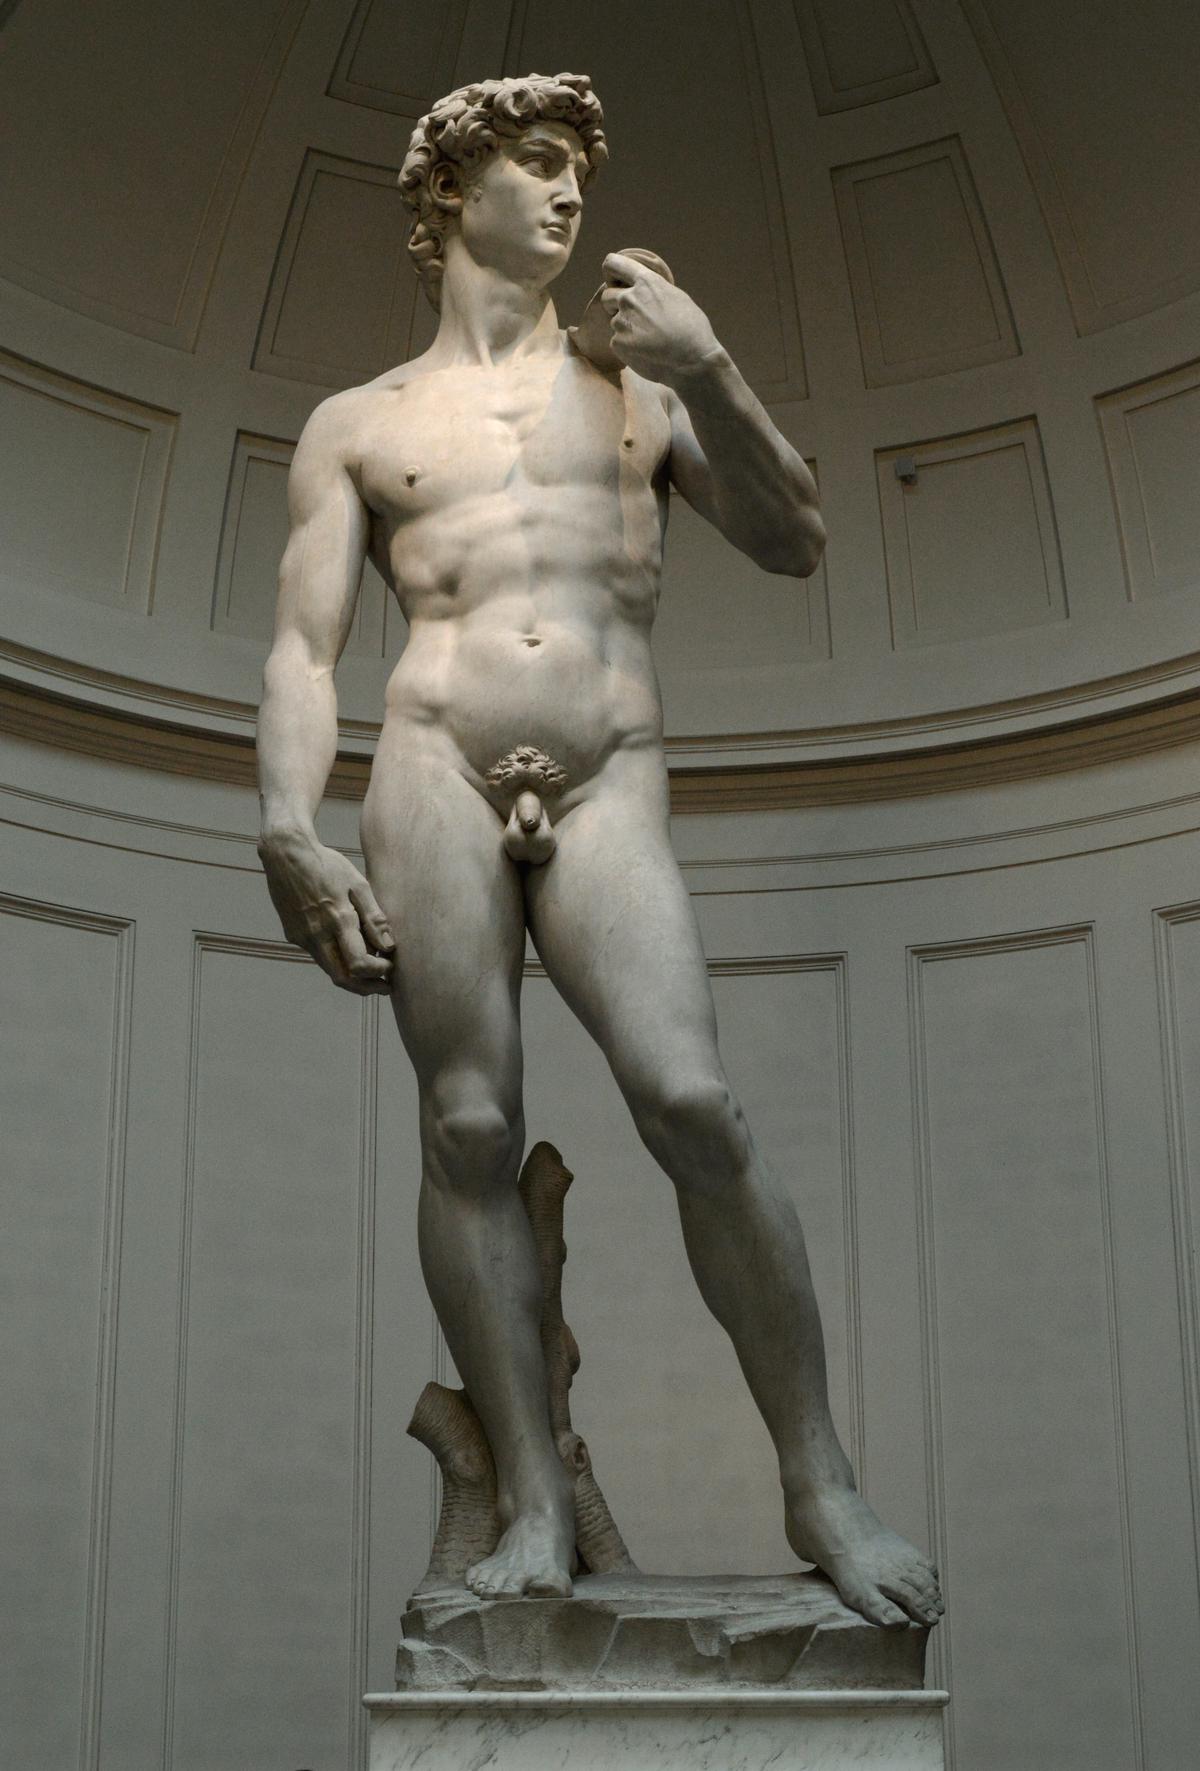 A close-up image of Michelangelo's David, showing the intricate details of the sculpture and emphasizing the skill of the artist.